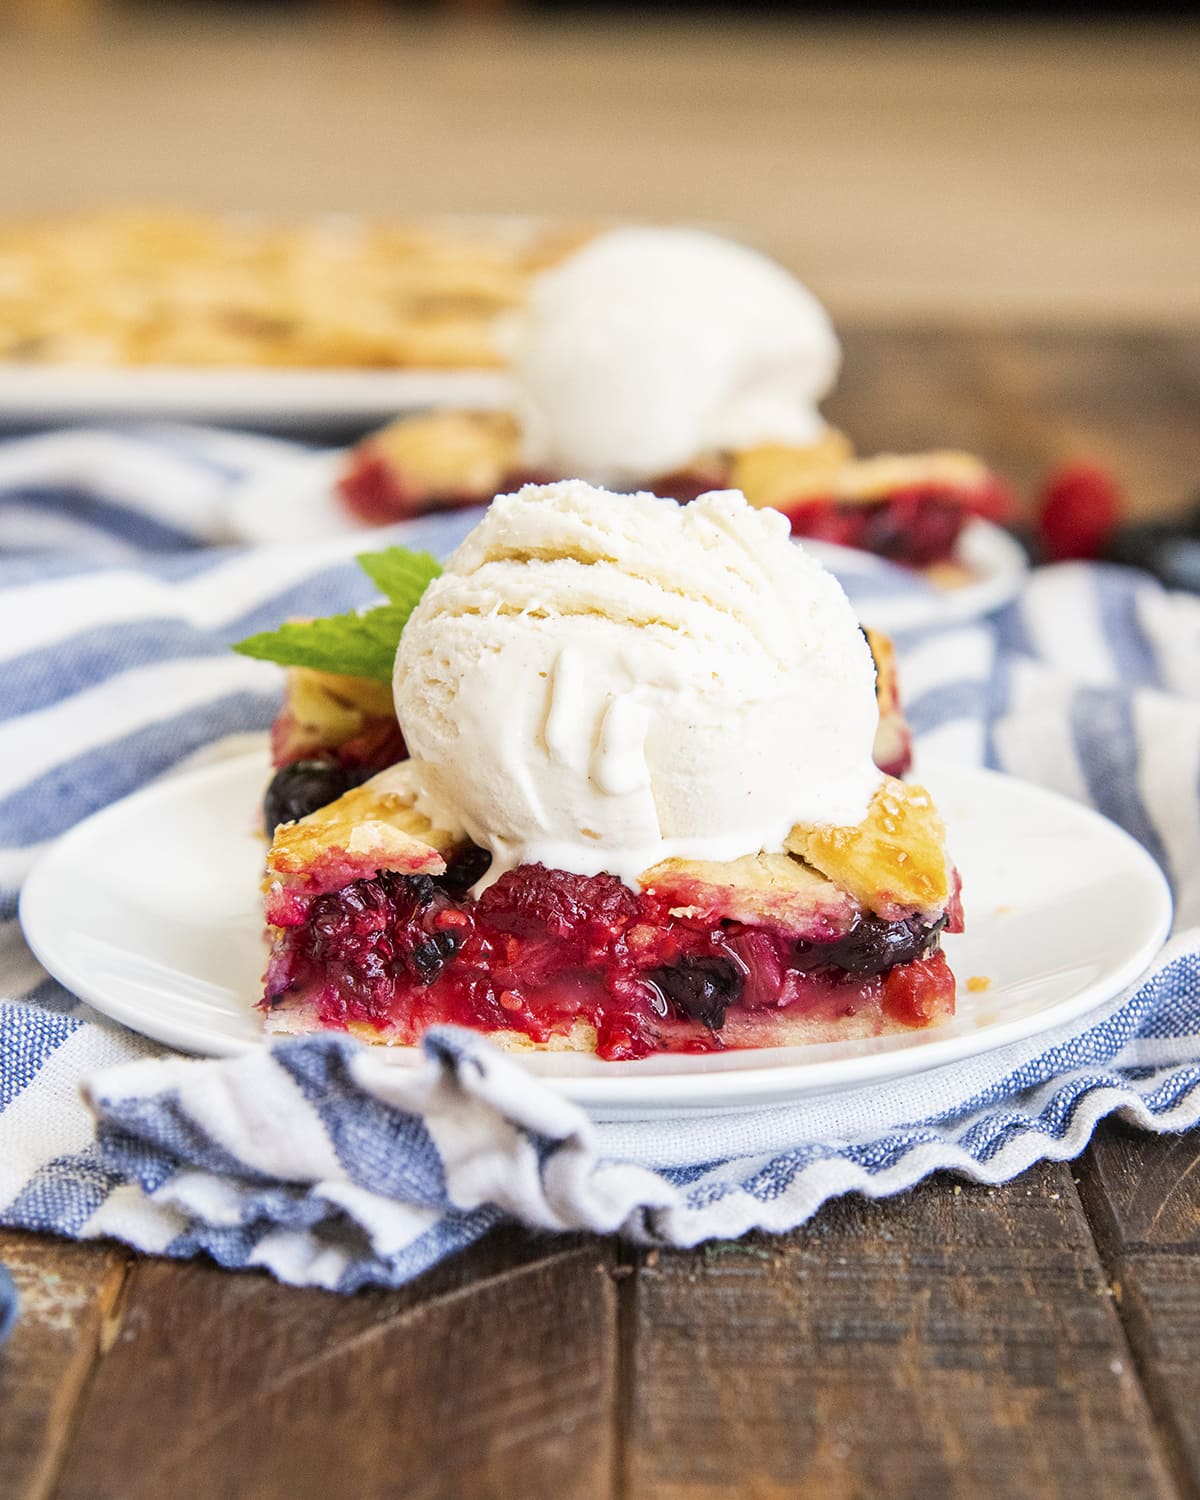 A piece of rhubarb and berry pie on a plate topped with a scoop of vanilla ice cream.